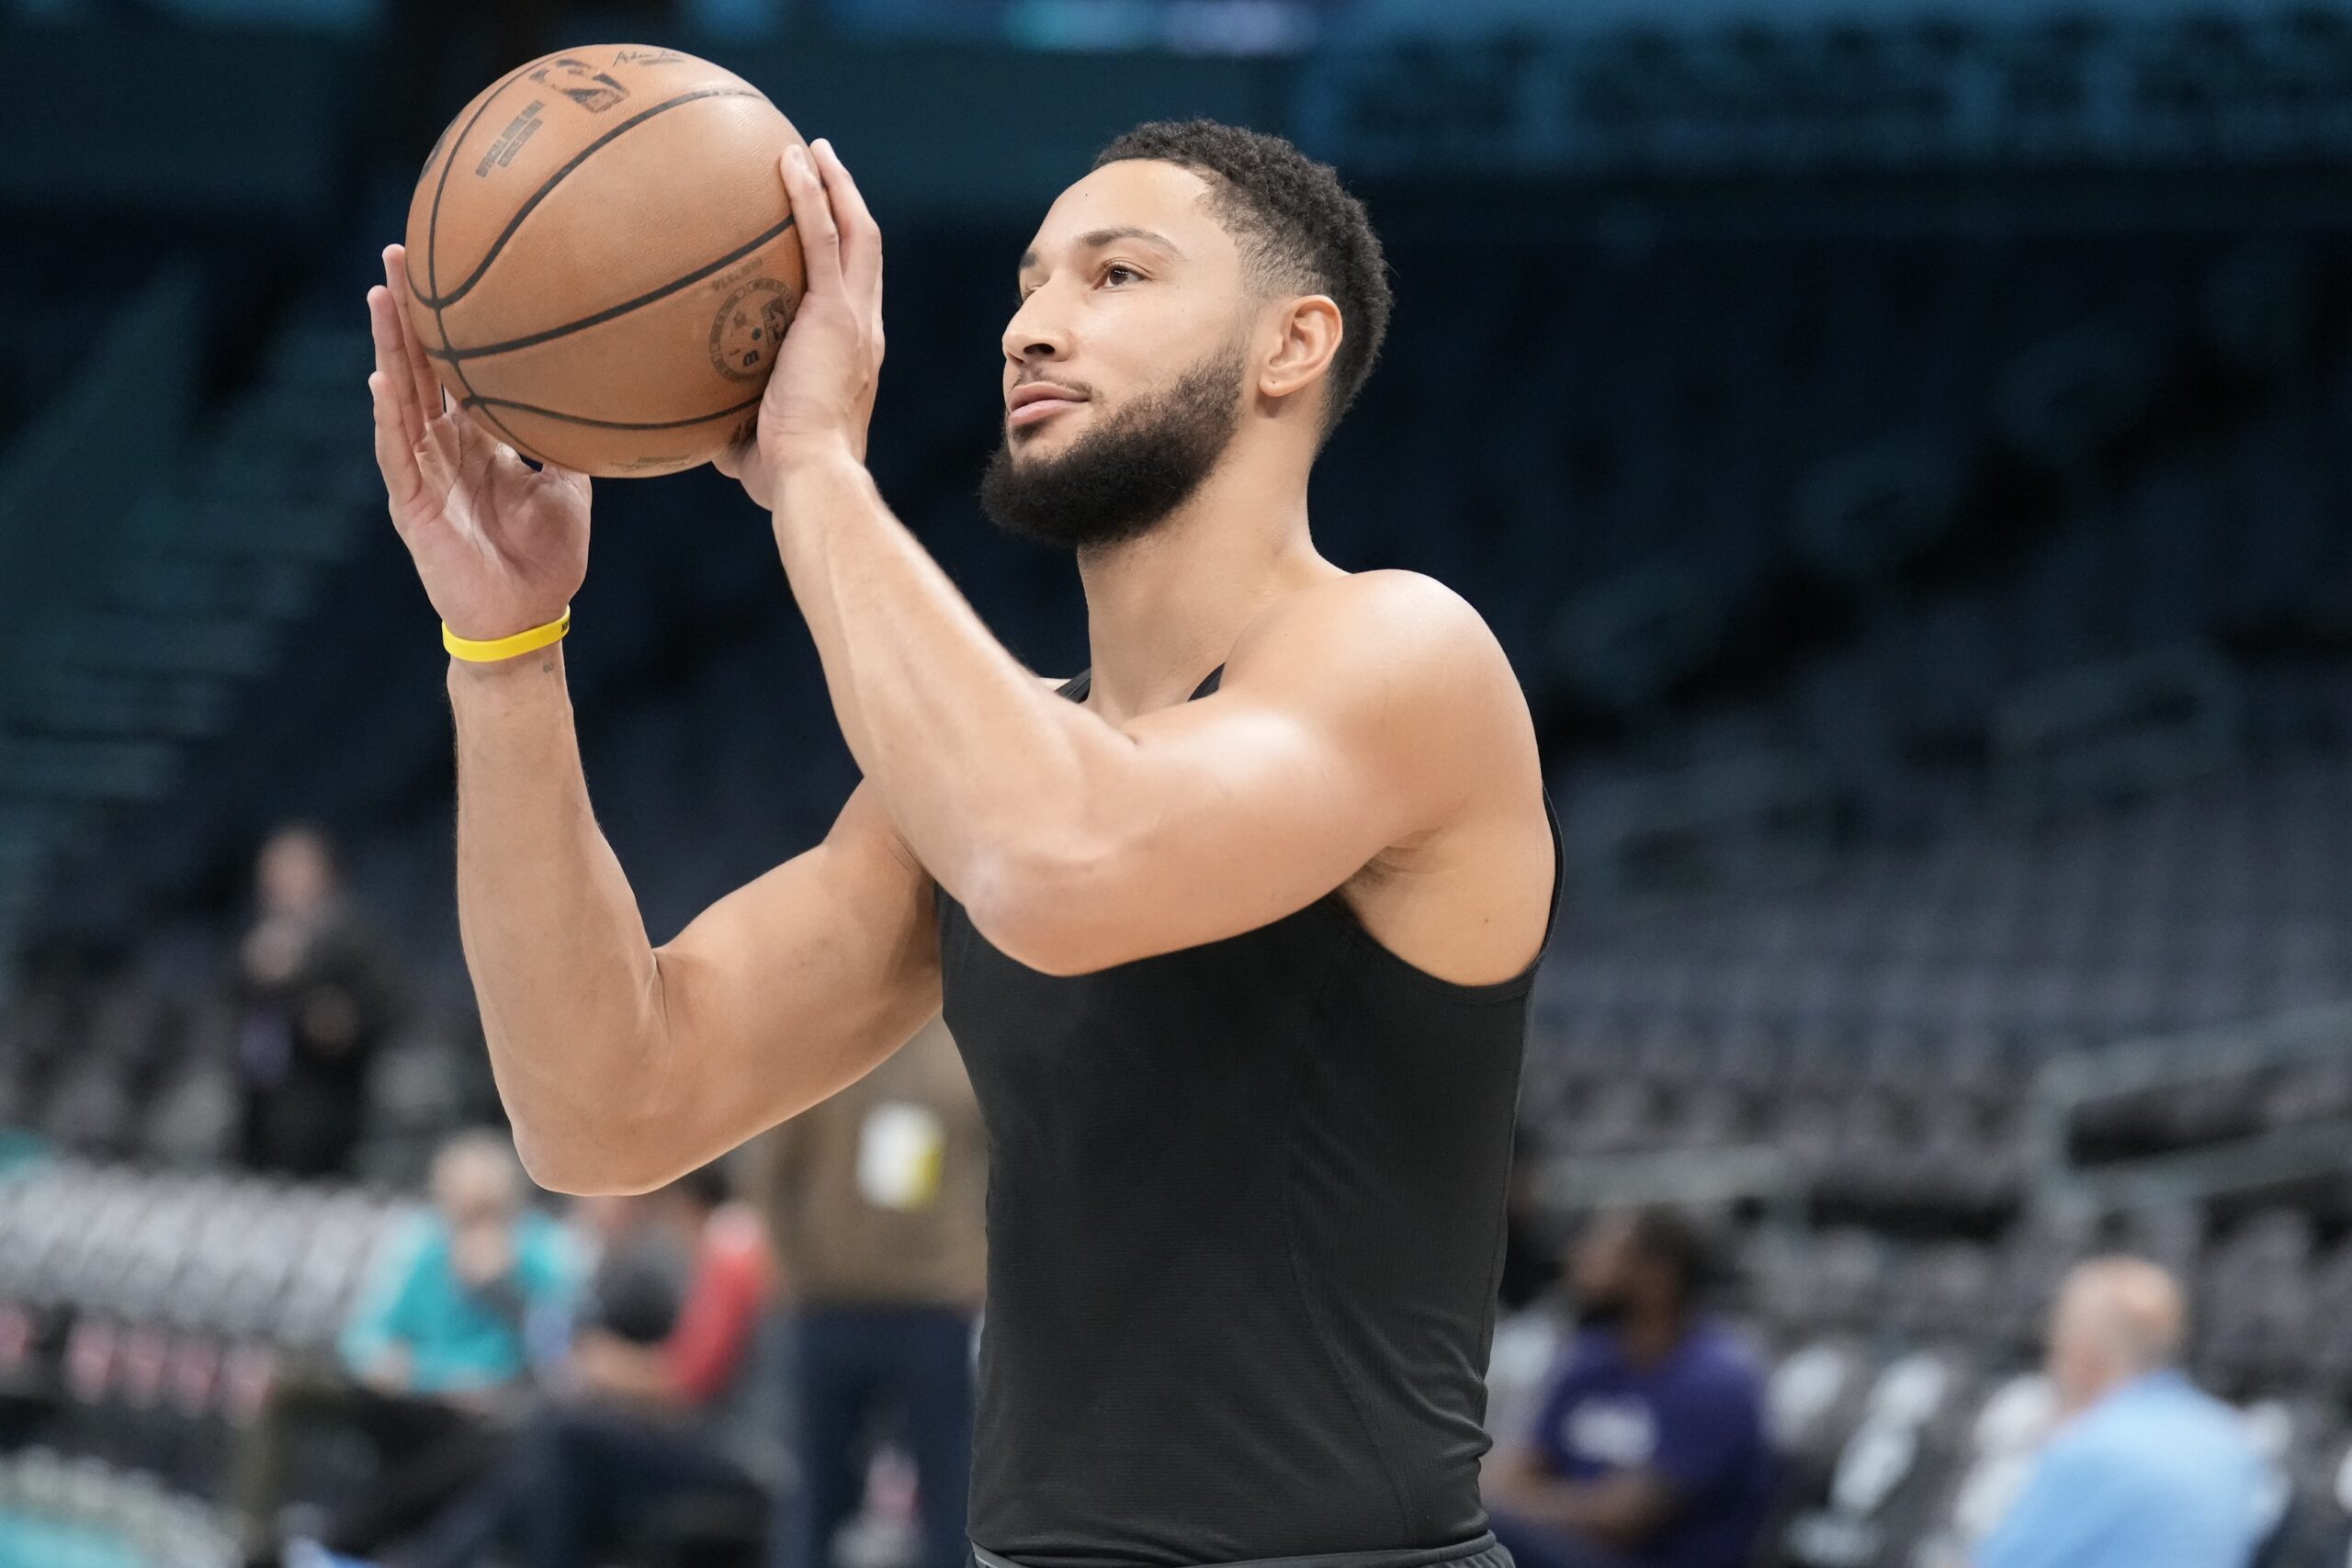 Ben Simmons will miss the rest of the Brooklyn Nets' season